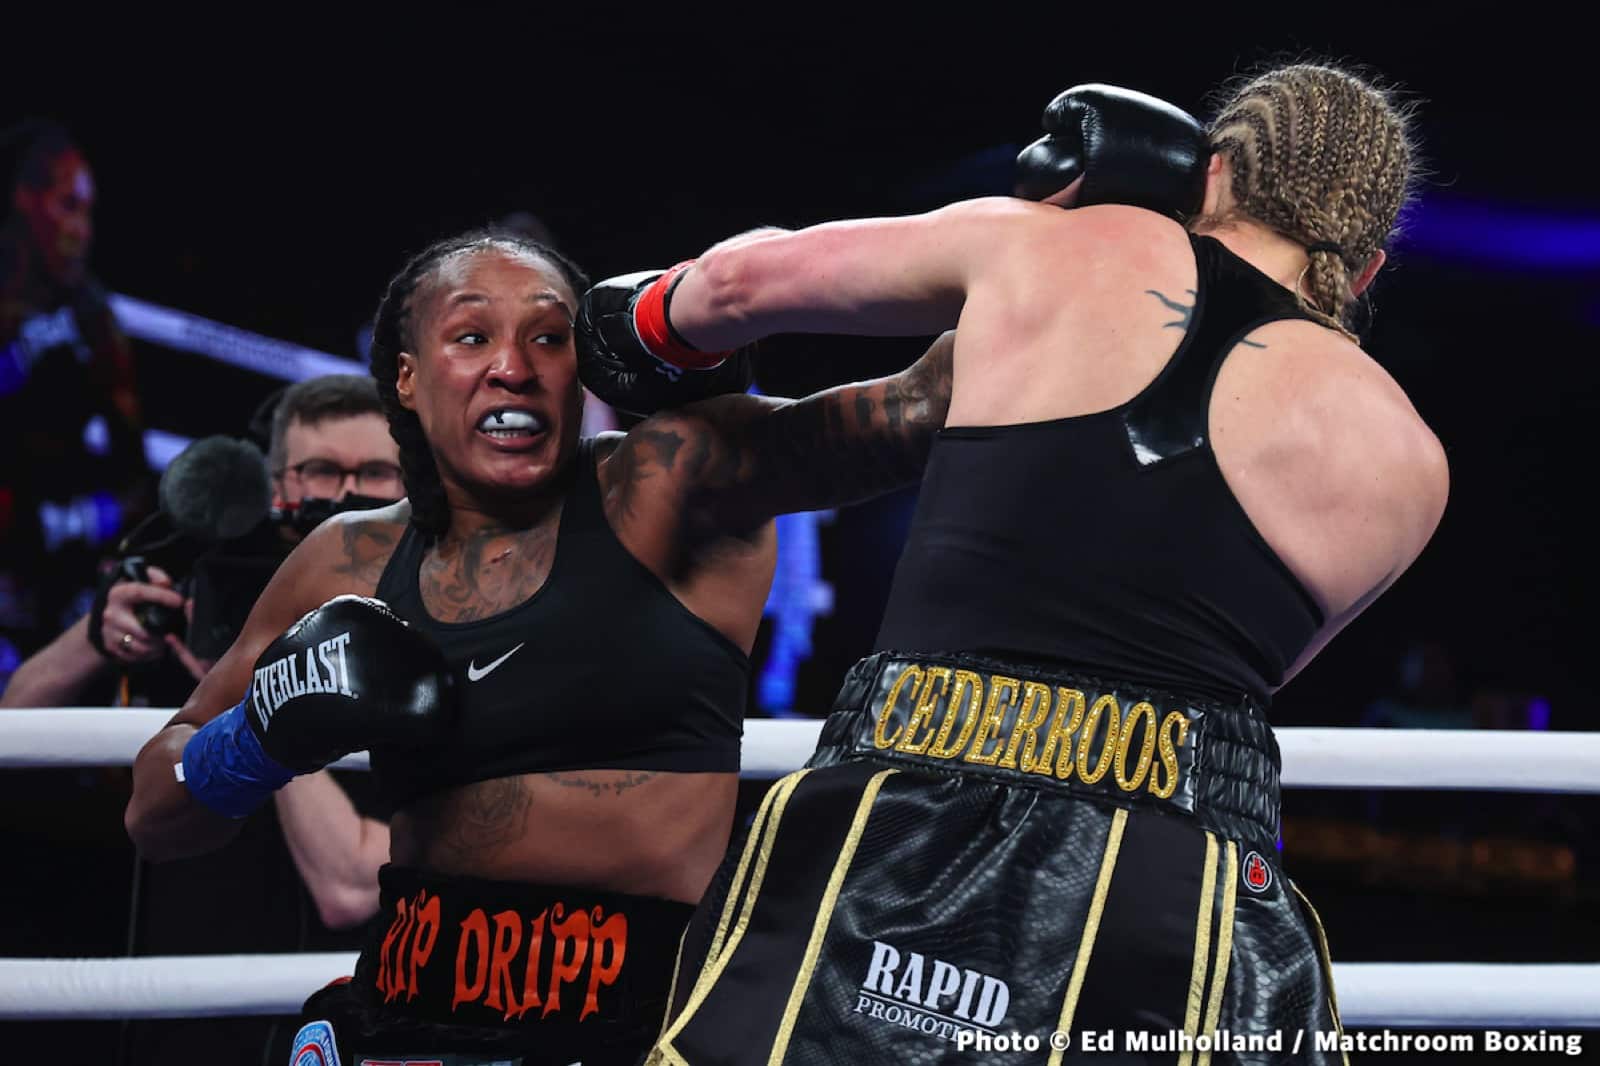 Image: Boxing Results: Shadasia Green Stops Cederroos In Six!